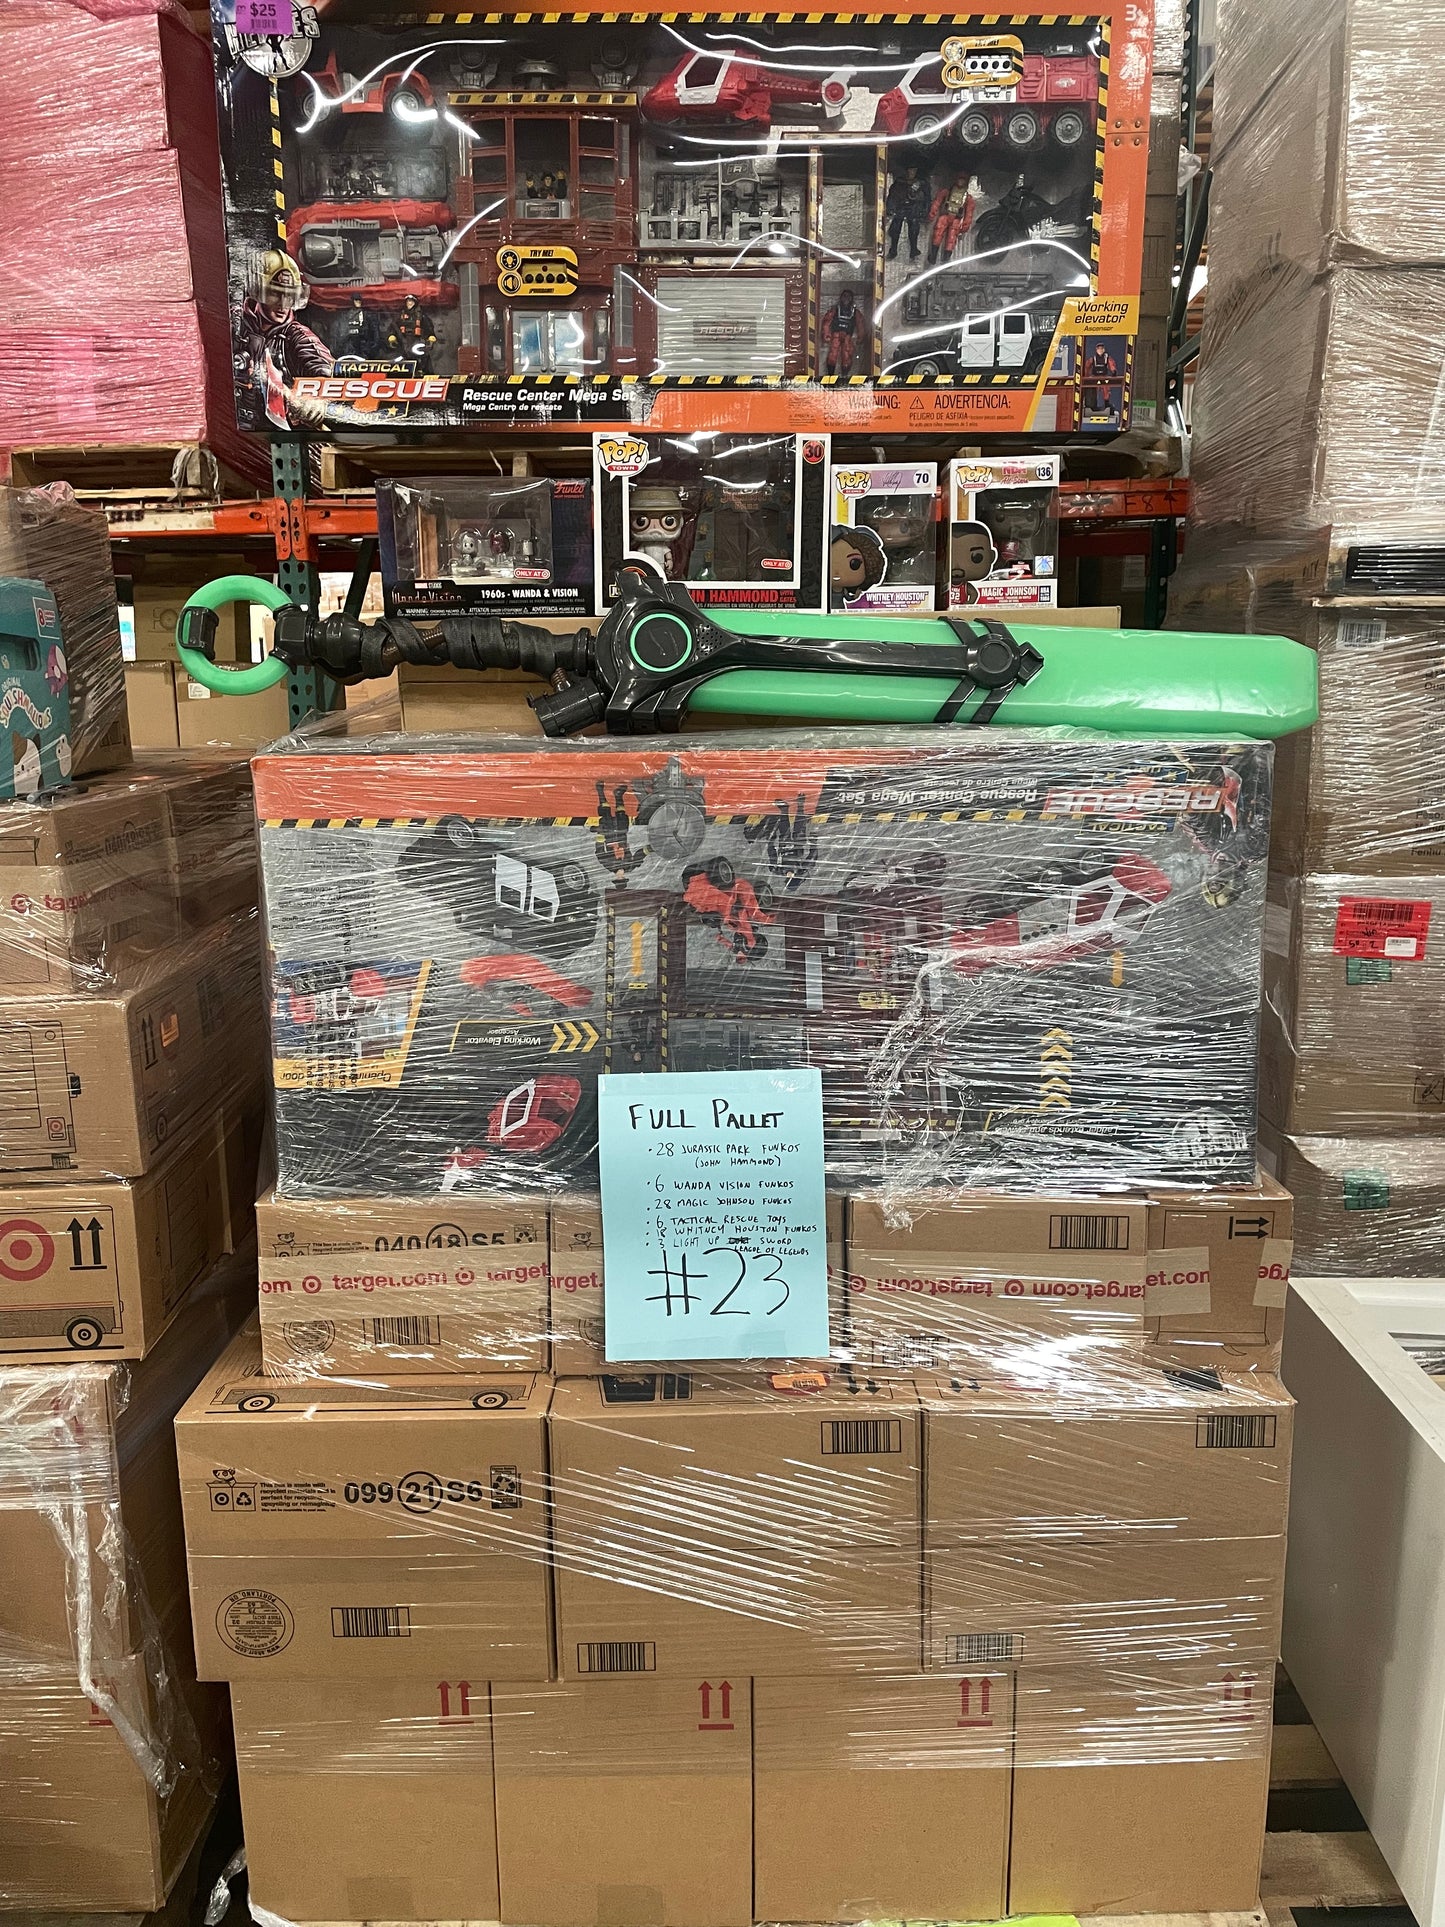 LOT #23 Wholesale Pallet of Mix of Toys.  Funko Pop, Tactical Rescue Toys, 3 Foot League of Legends Swords (Retail $2400)) Pickup Only!